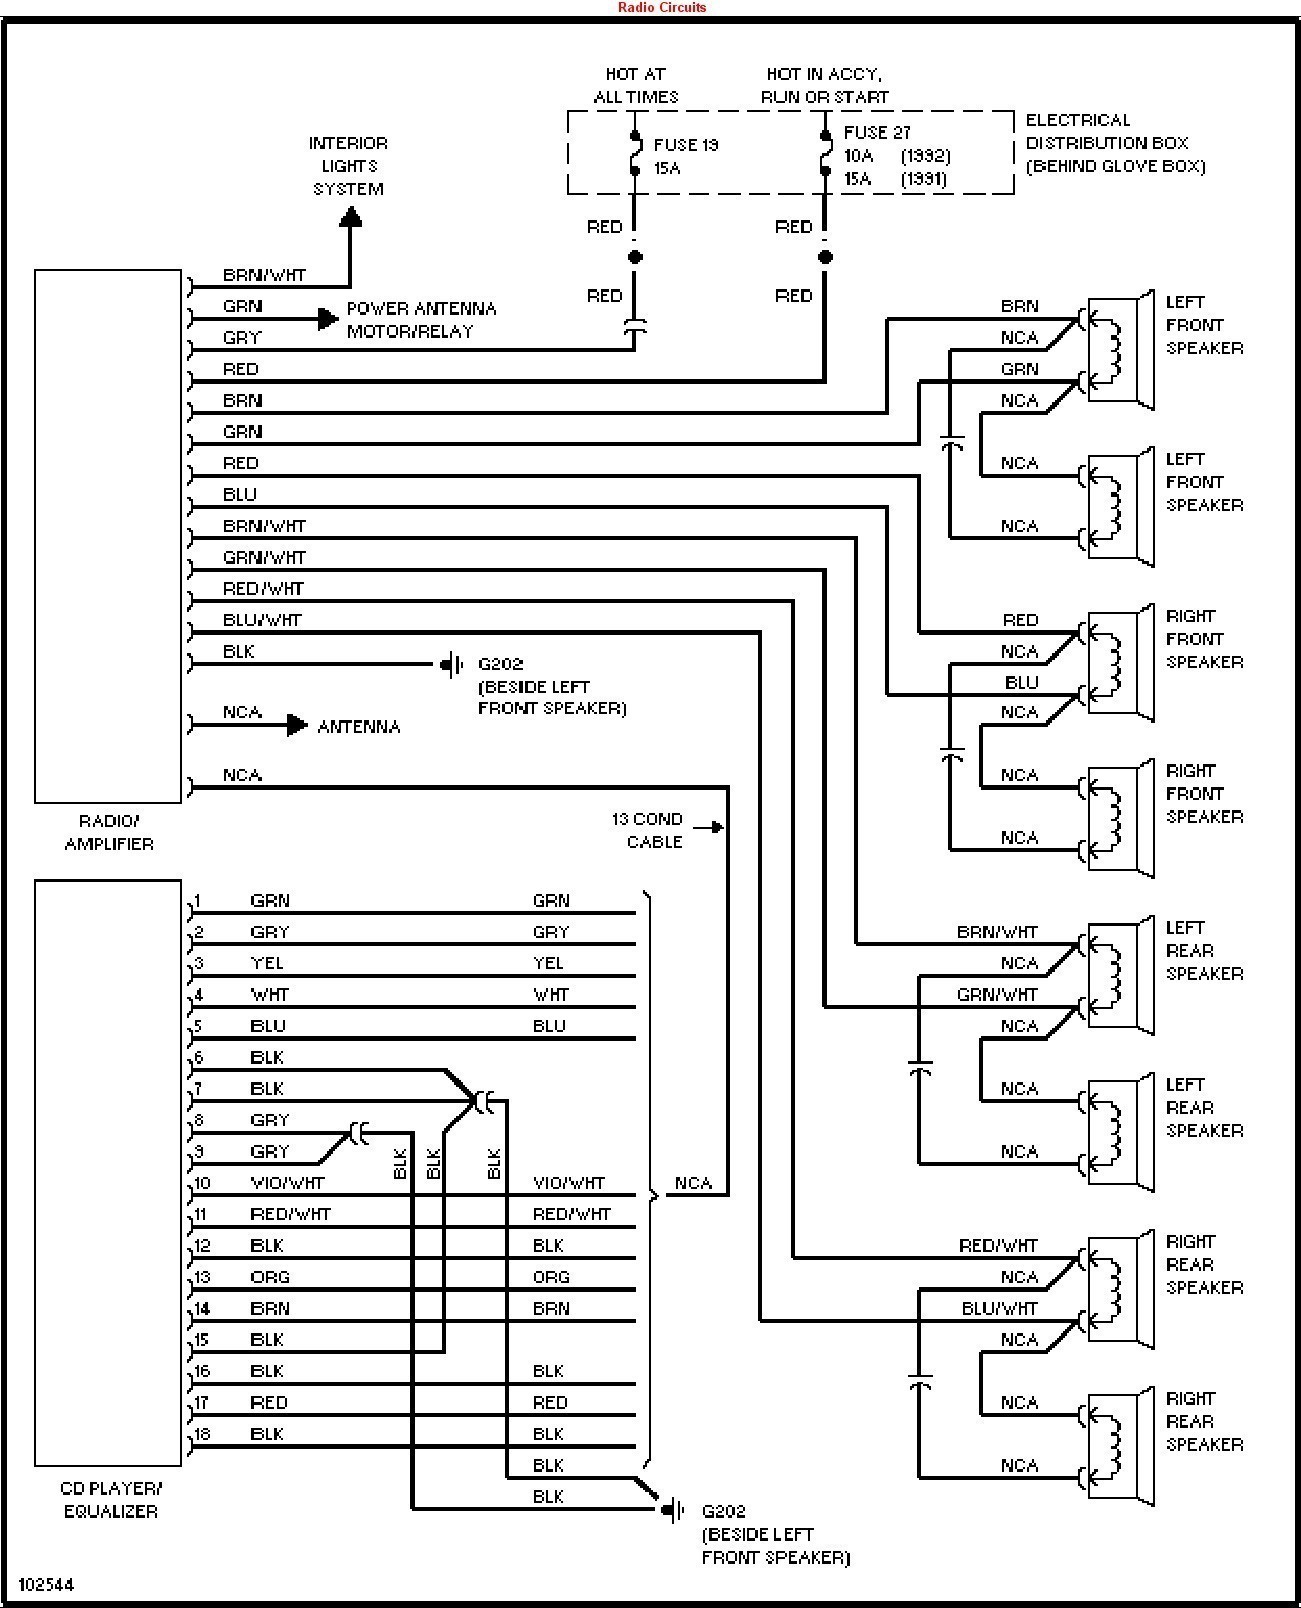 Car Power Antenna Wiring Diagram Wiring Diagrams Bmw Z3 Radio Antenna Simple Guide About Of Car Power Antenna Wiring Diagram